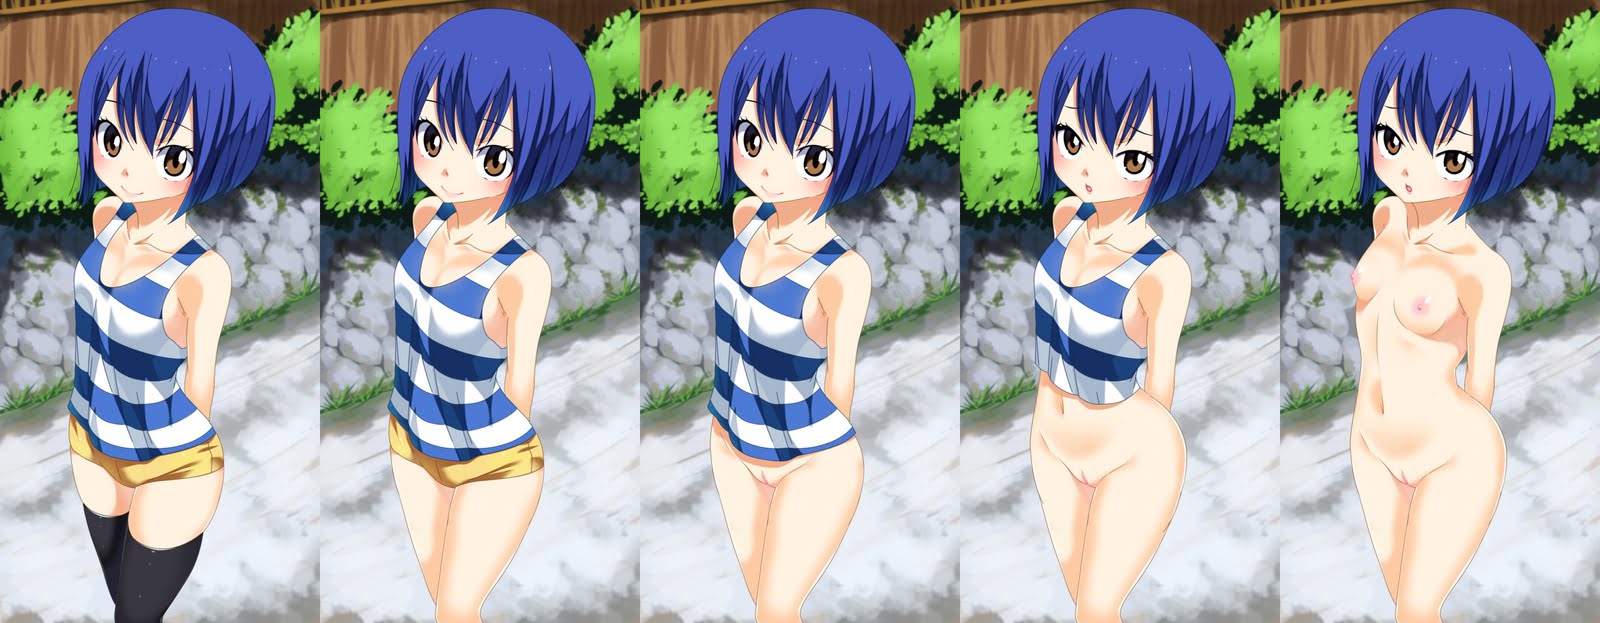 wendy marvell hentai fairy tail 96